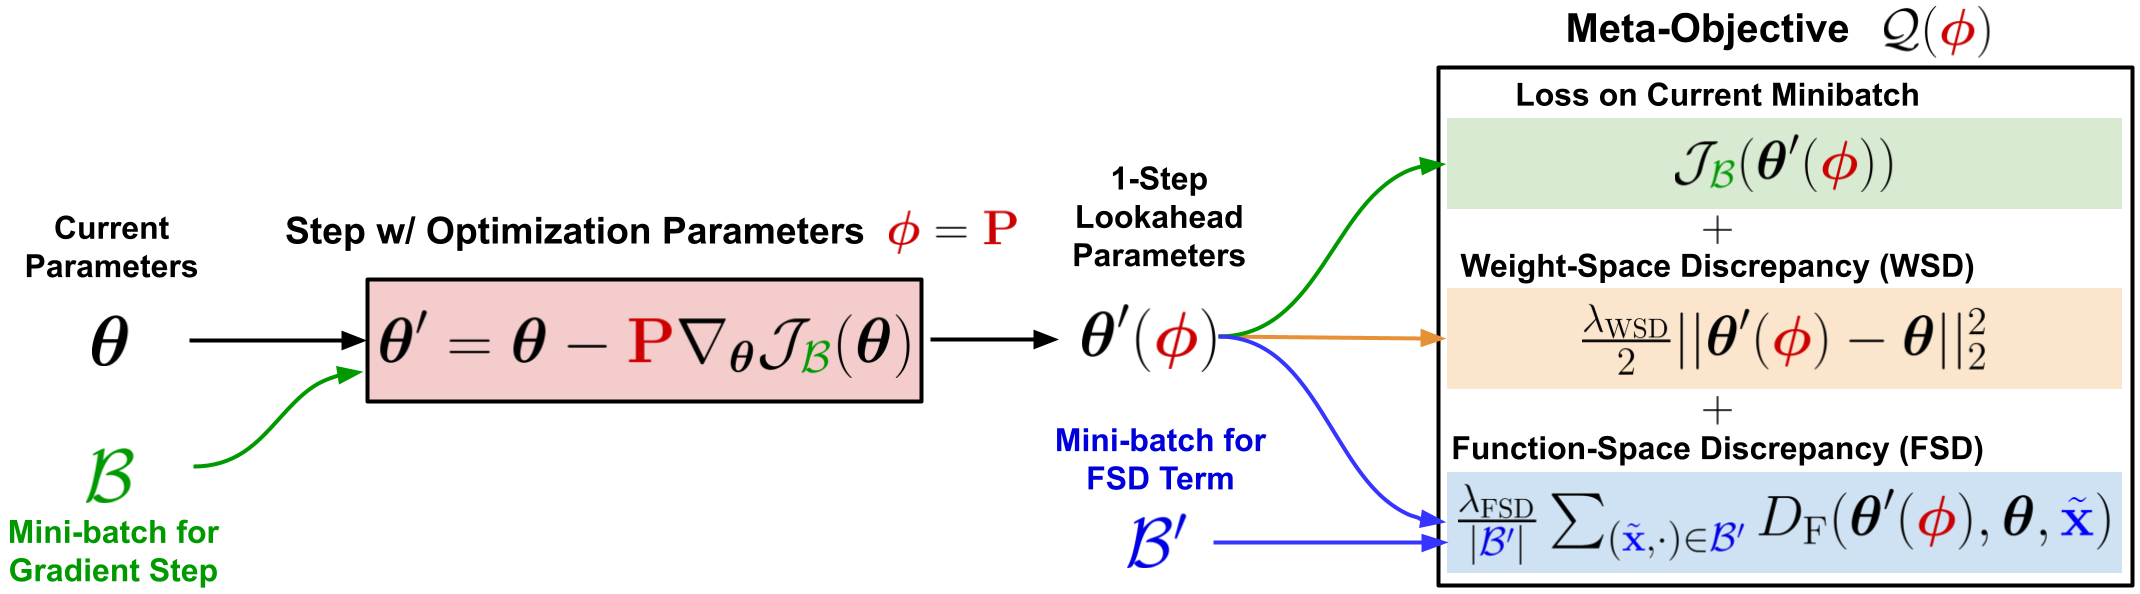 Computation graph for the proximal meta-objective used in APO.